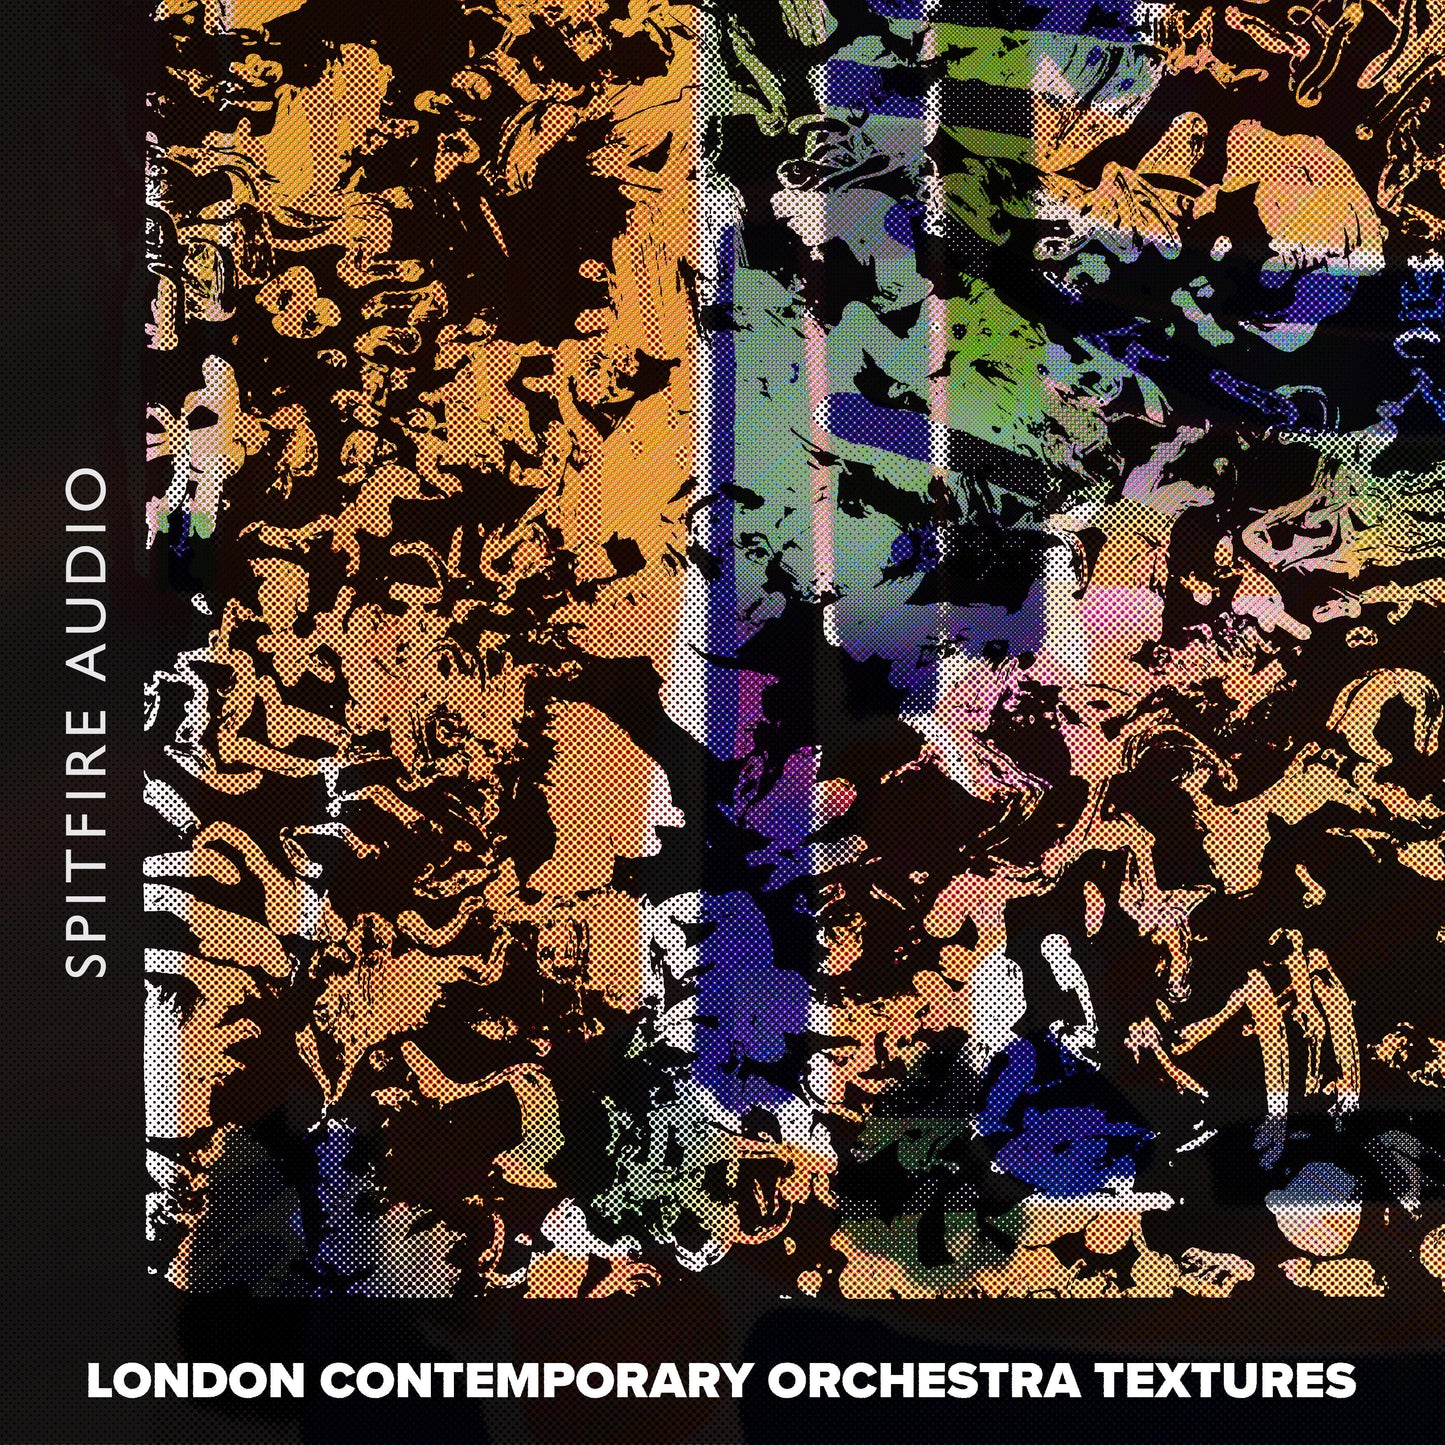 London Contemporary Orchestra Textures